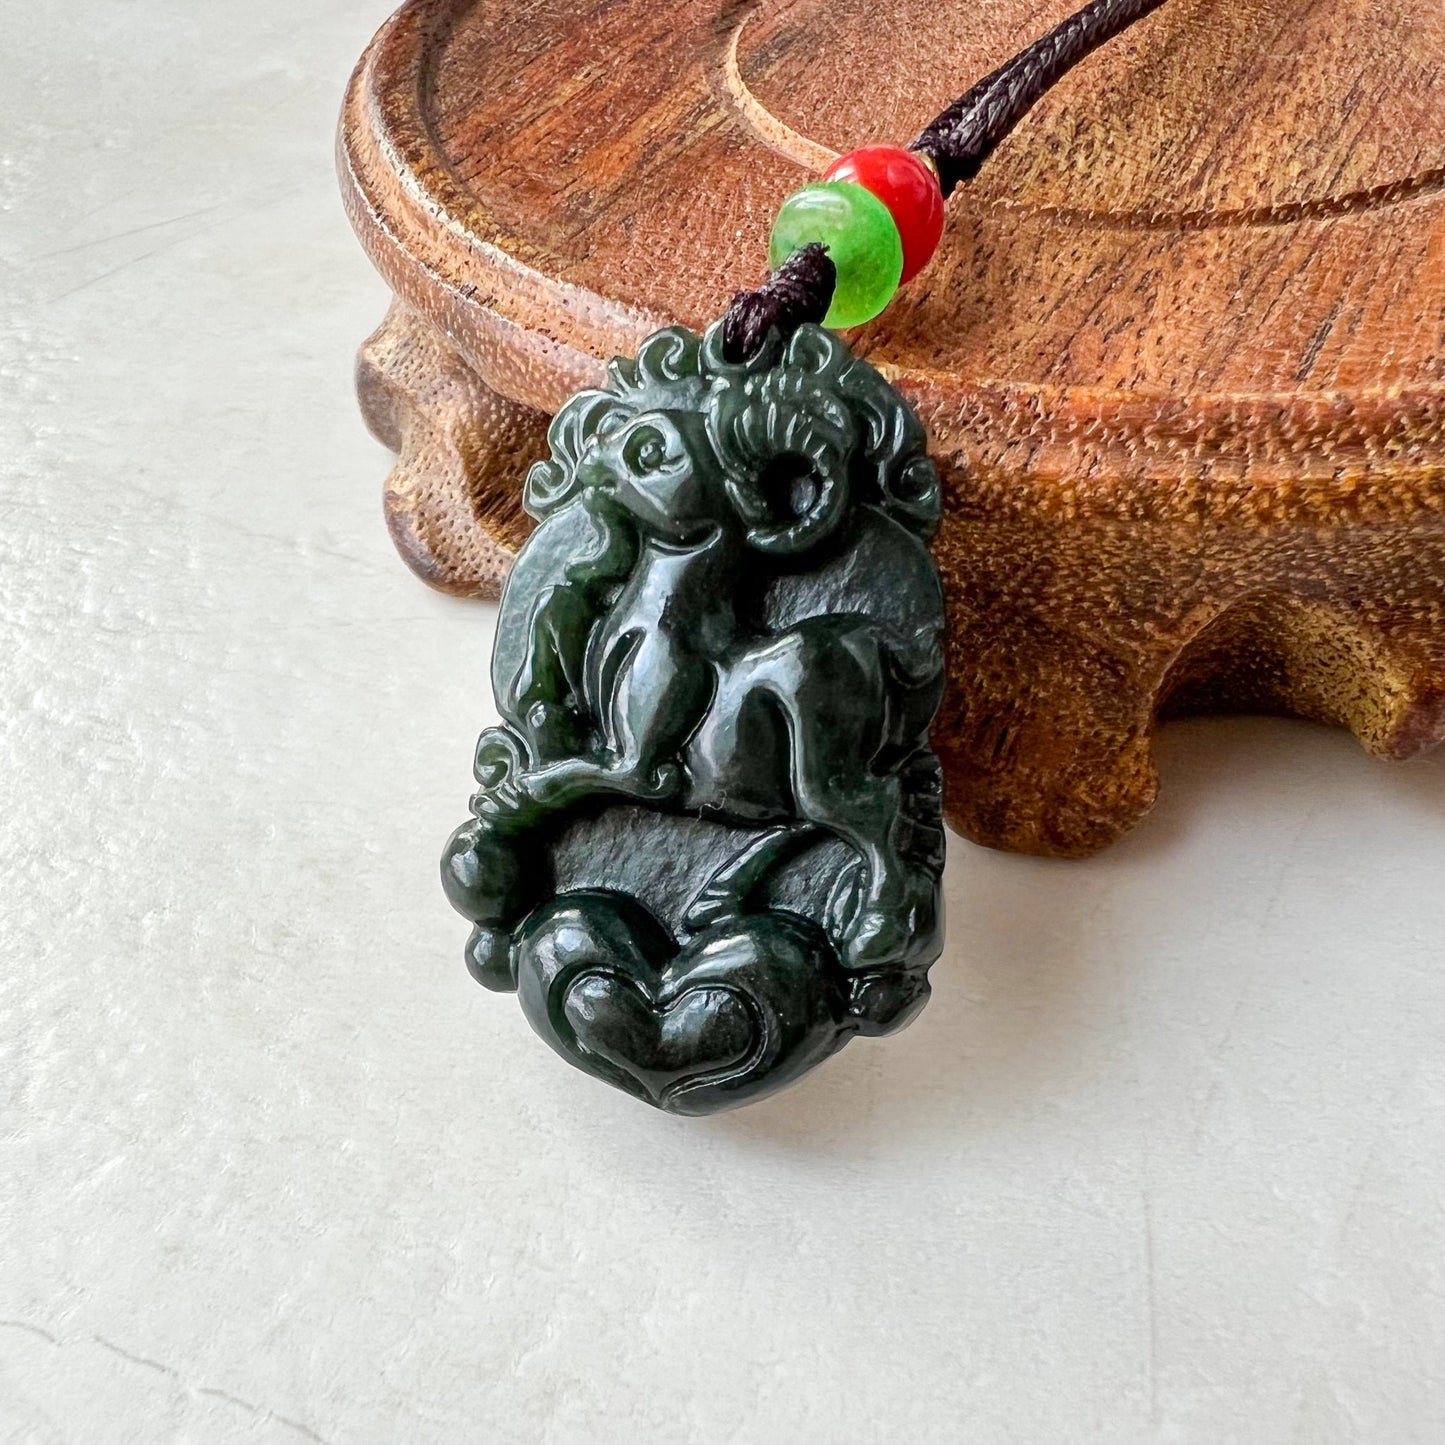 Sheep Goat Ram Chinese Zodiac Carved, Dark Green Nephrite Jade Pendant Necklace, RM-1221-1655274295 - AriaDesignCollection